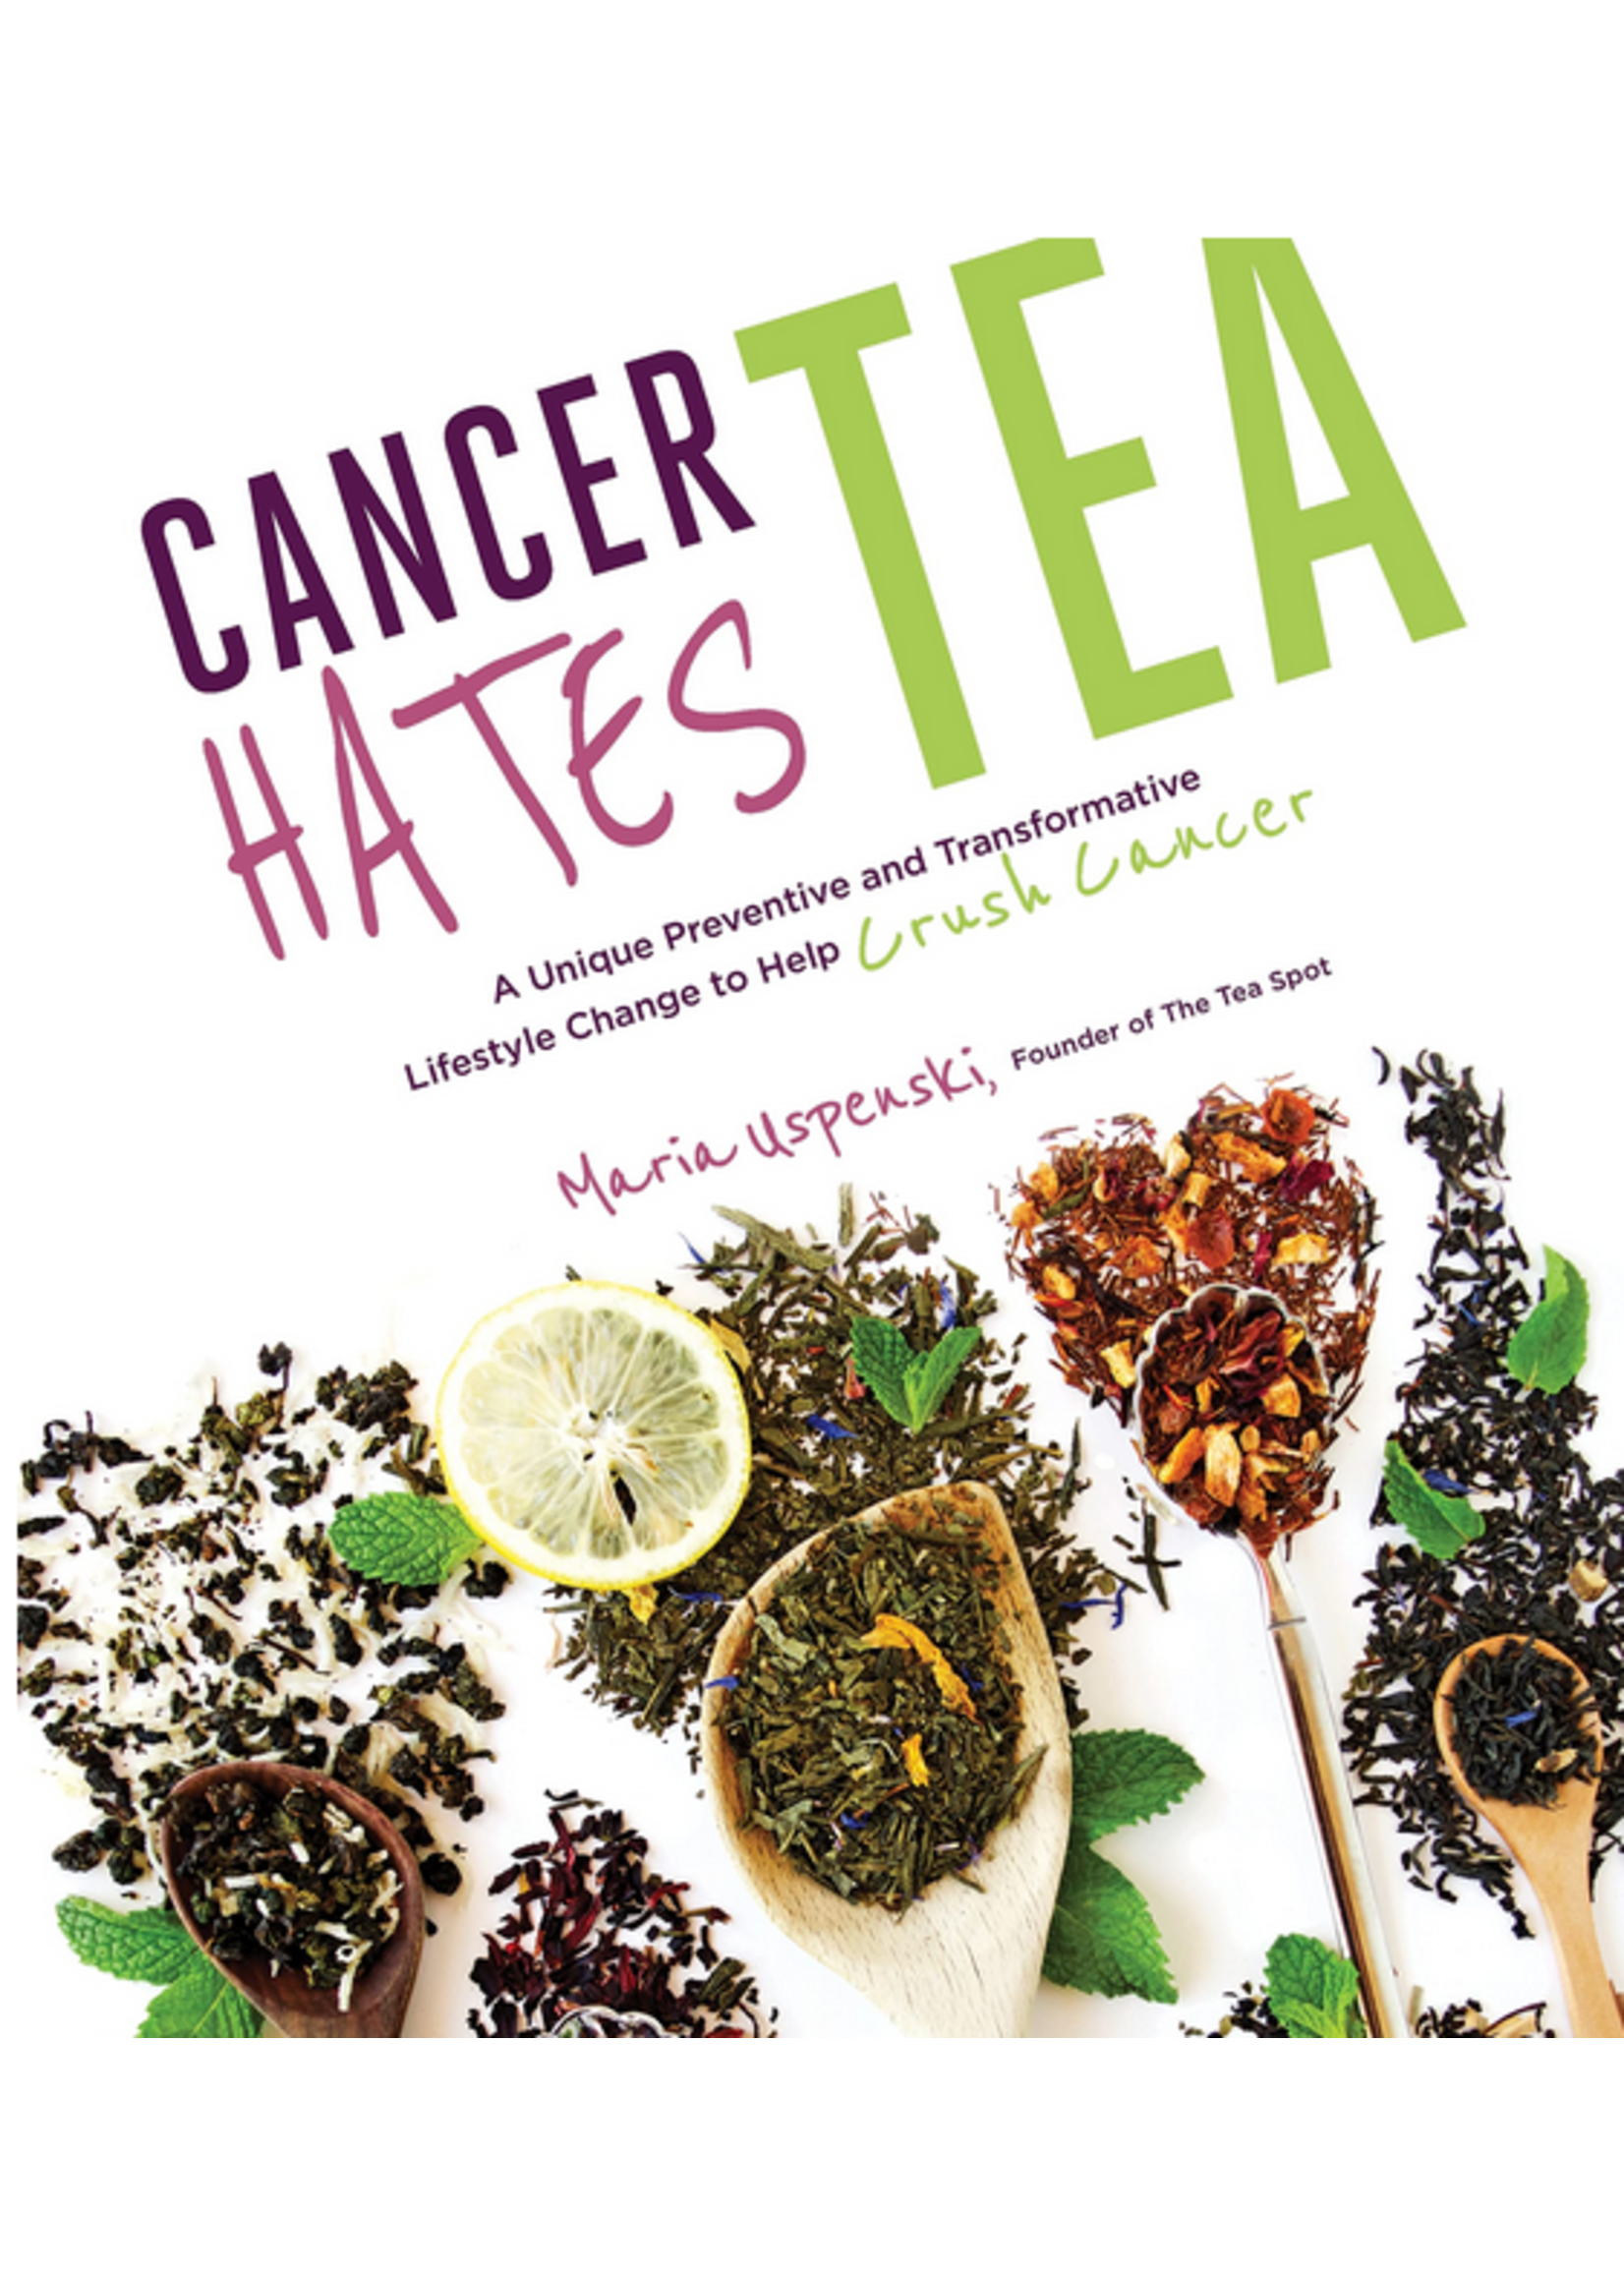 Cancer Hates Tea: A Unique Preventive and Transformative Lifestyle Change to Hel